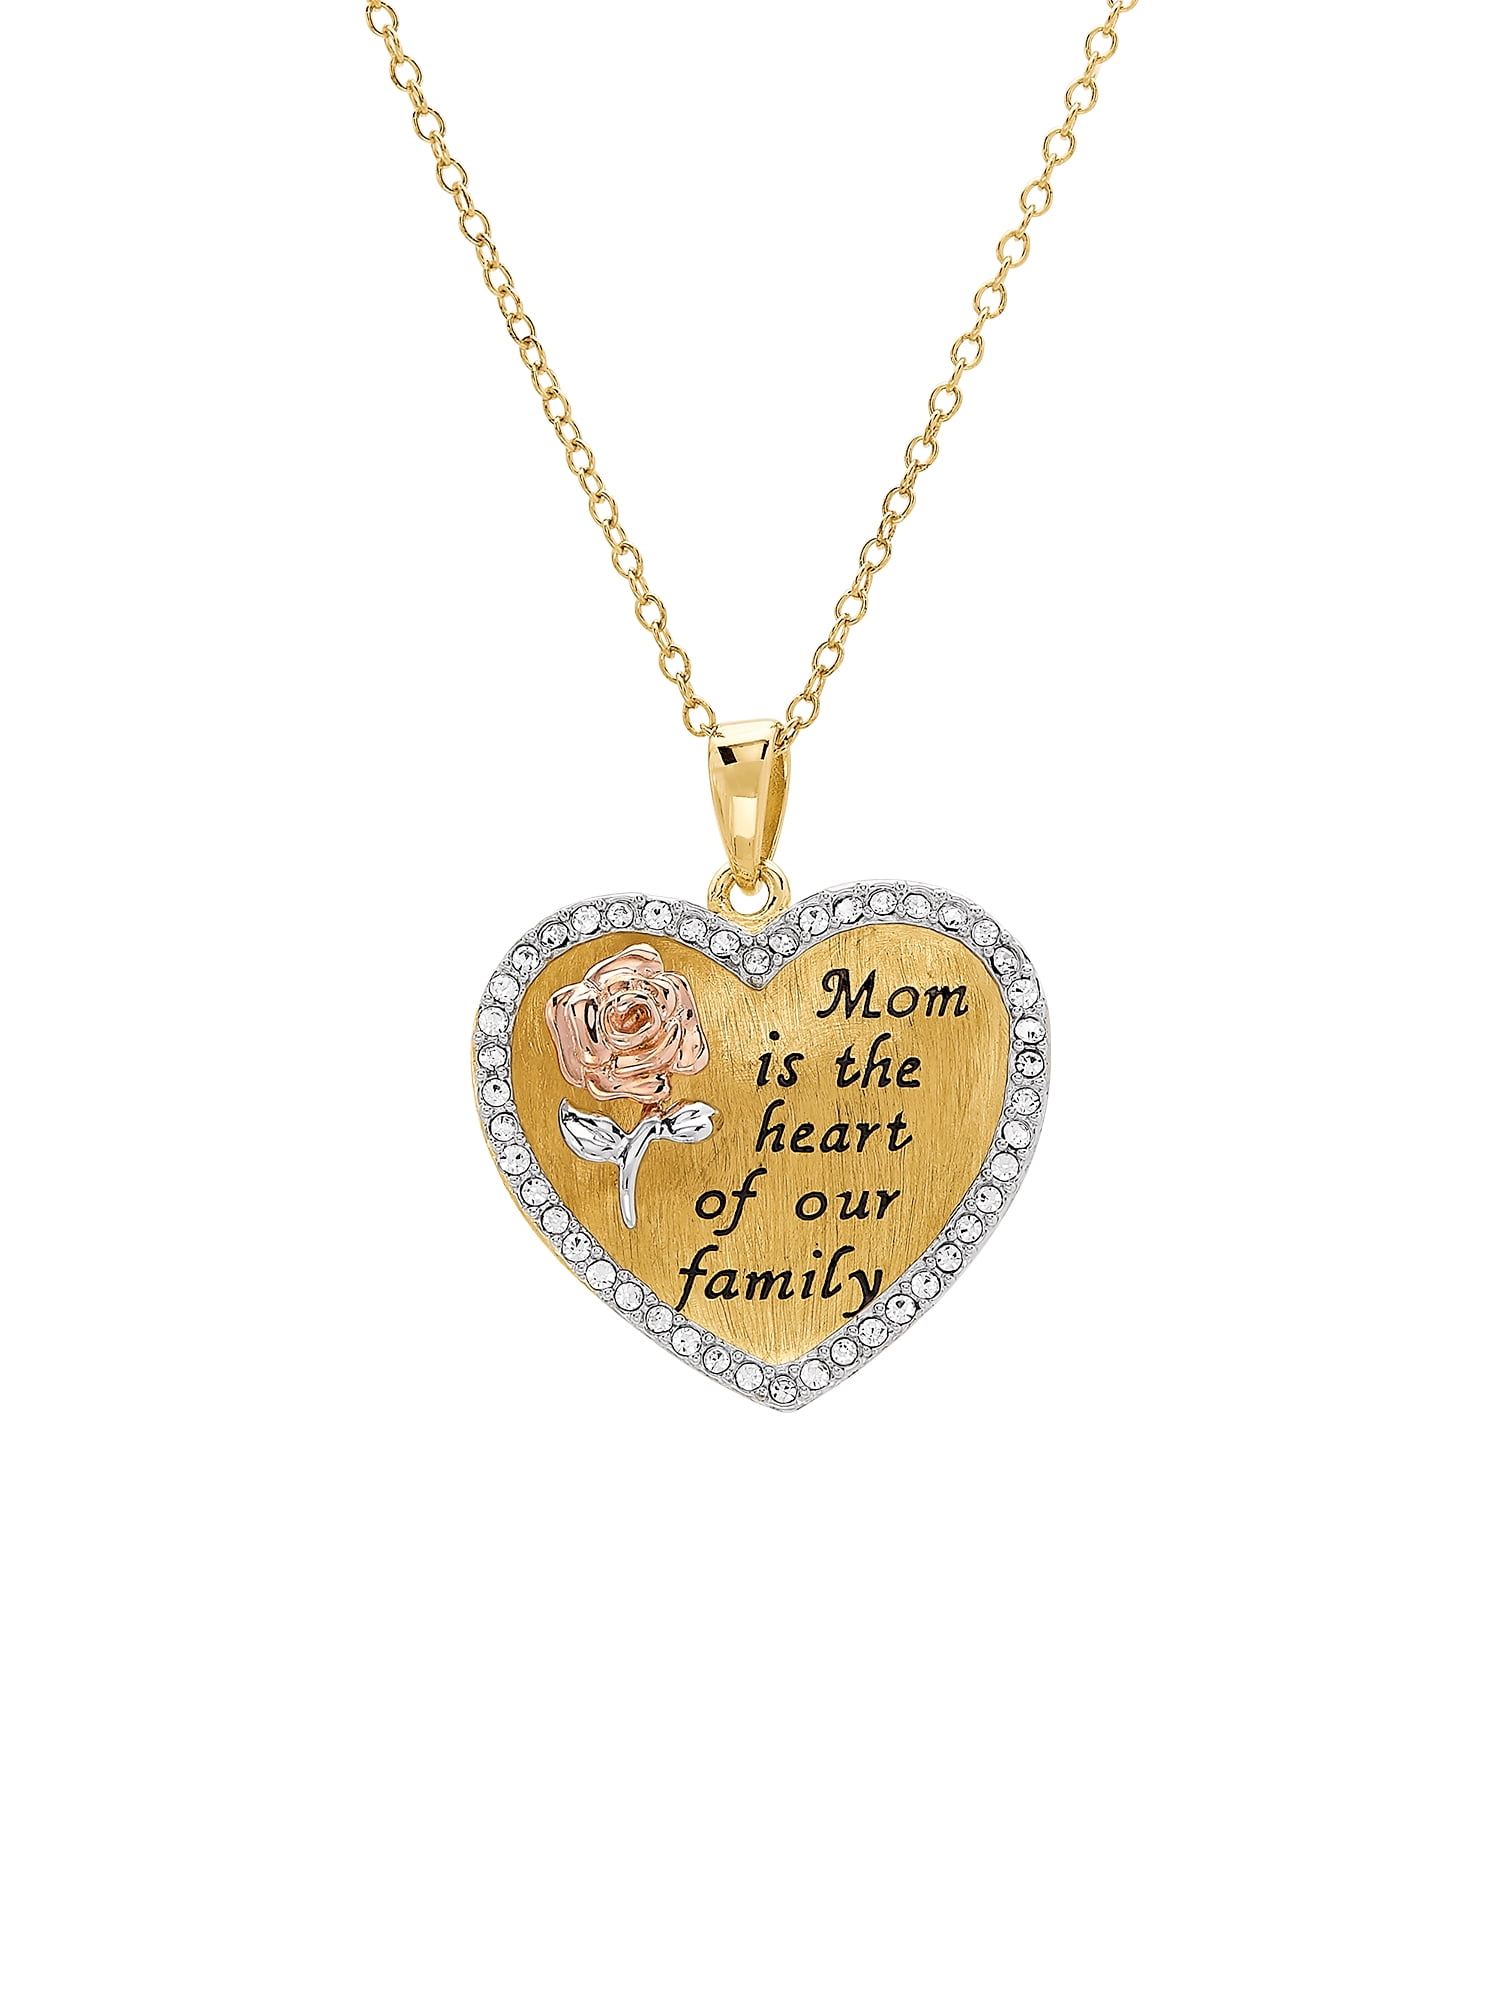 Crystal Rhinestone Love Heart Engraved Silver Pendant Necklace Mum Family A